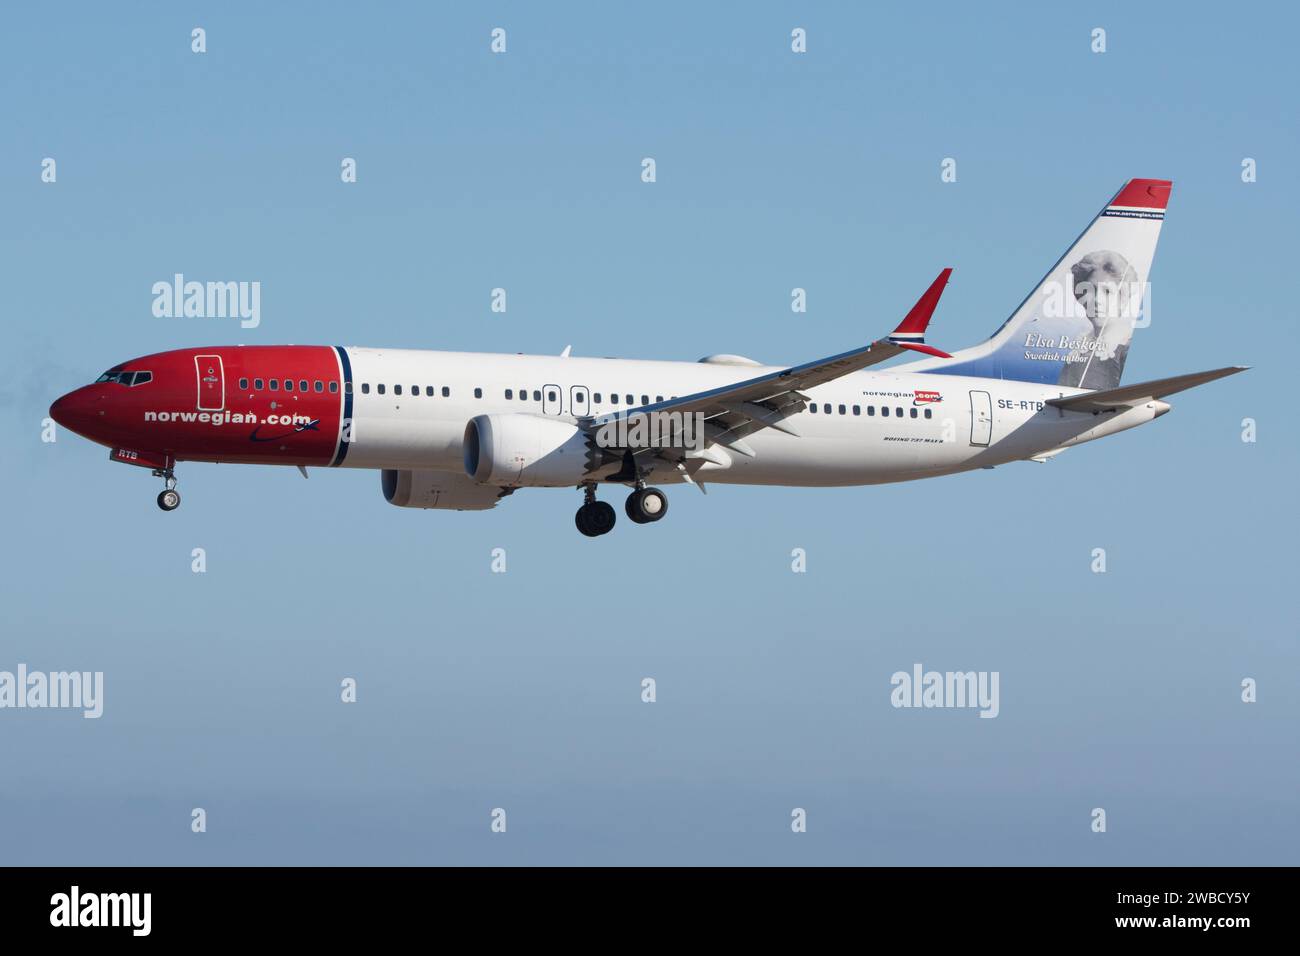 Boeing 737 airliner of Norwegian Air Sweden AOC airline Stock Photo